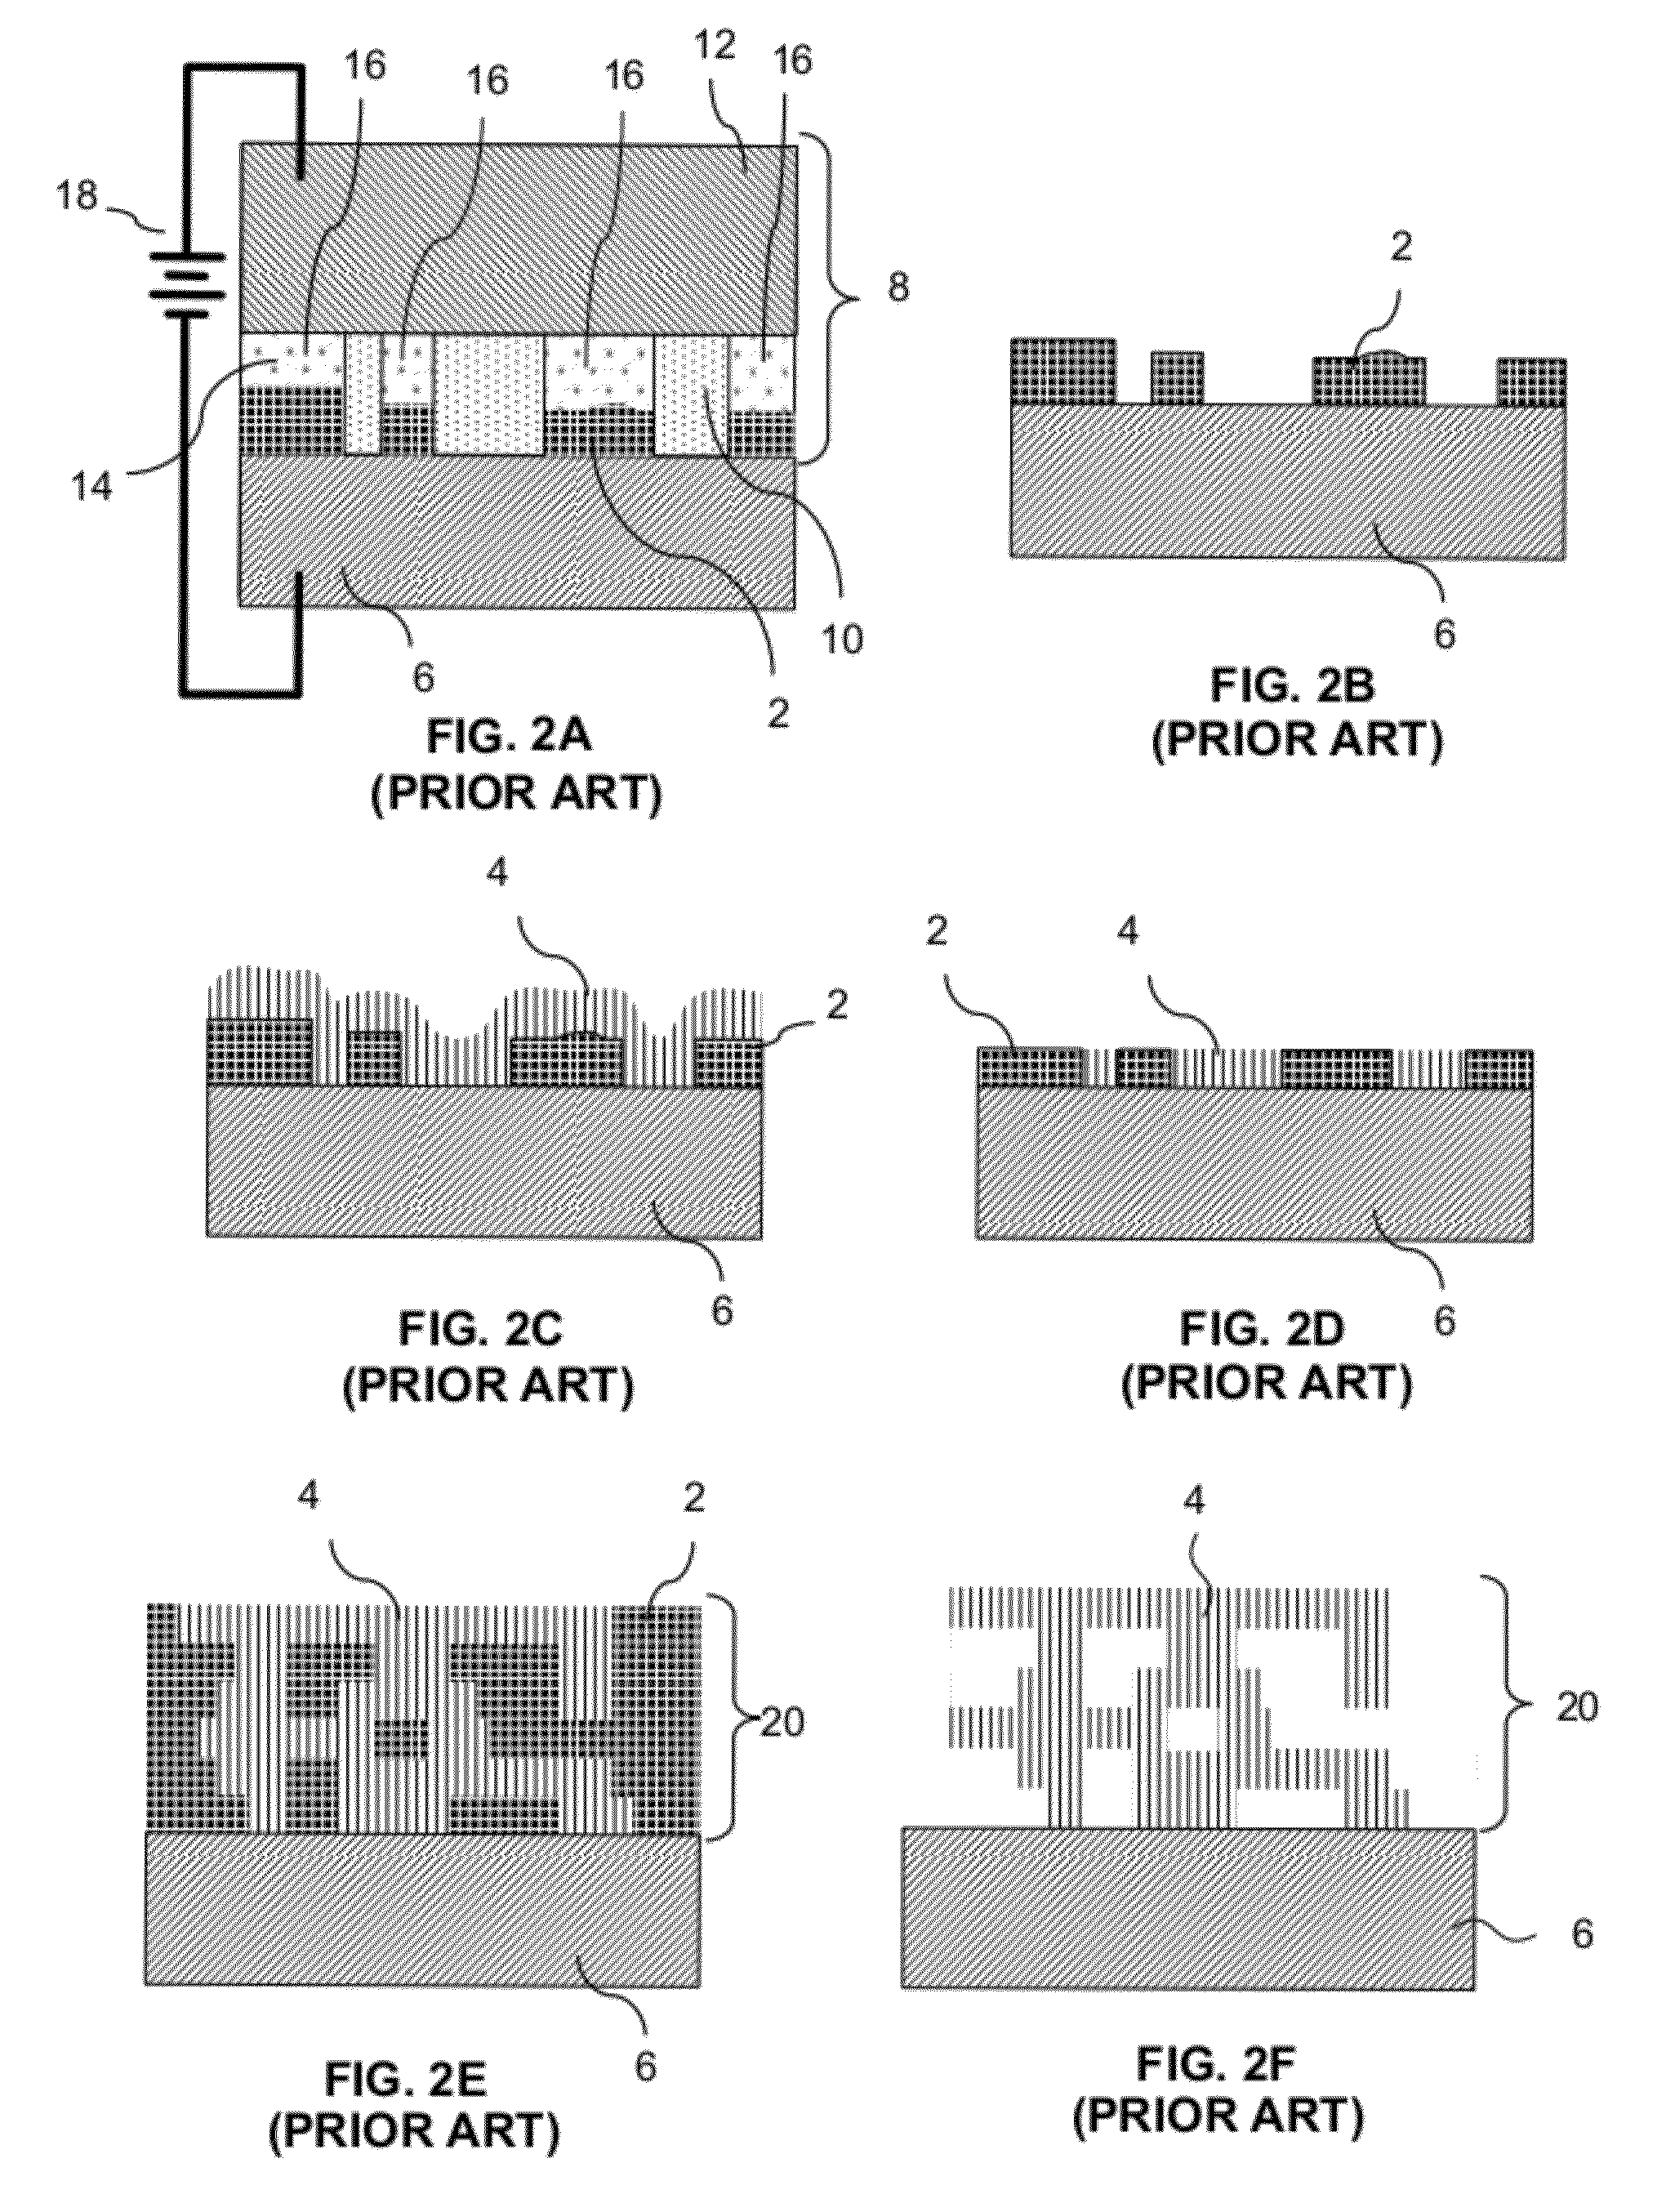 Enhanced methods for at least partial in situ release of sacrificial material from cavities or channels and/or sealing of etching holes during fabrication of multi-layer microscale or millimeter-scale complex three-dimensional structures